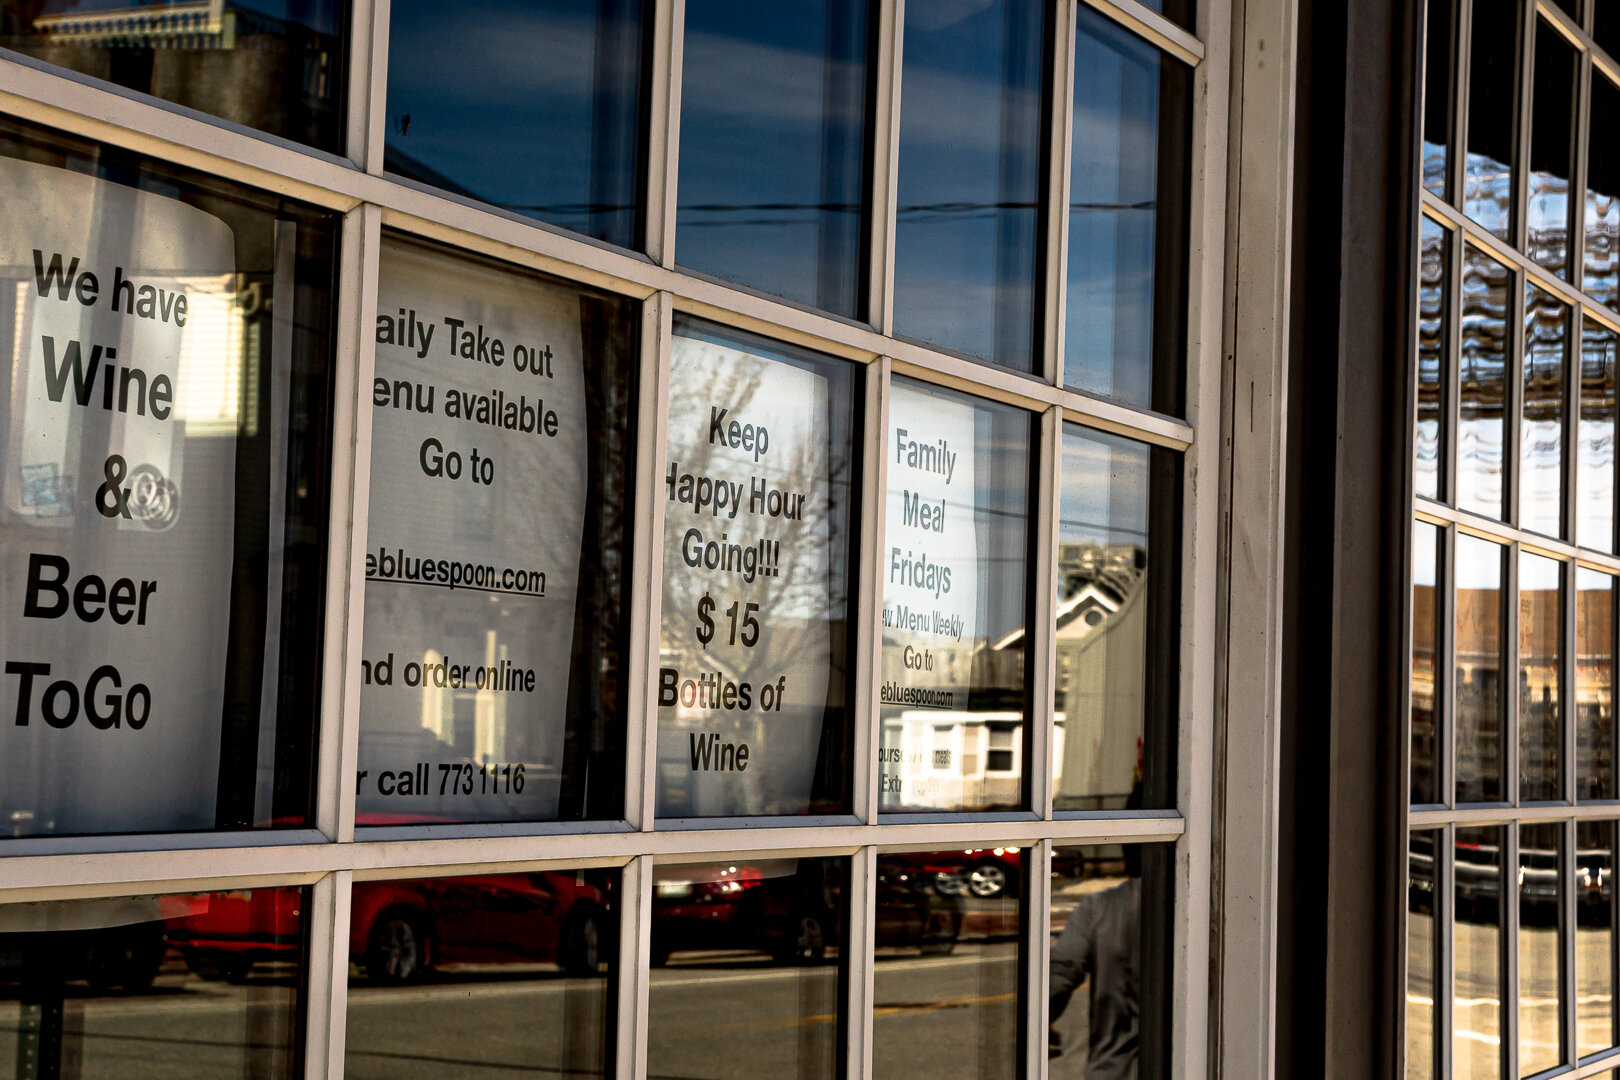 Food and Wine To Go, Congress St., Portland, Maine--April 2020.jpg